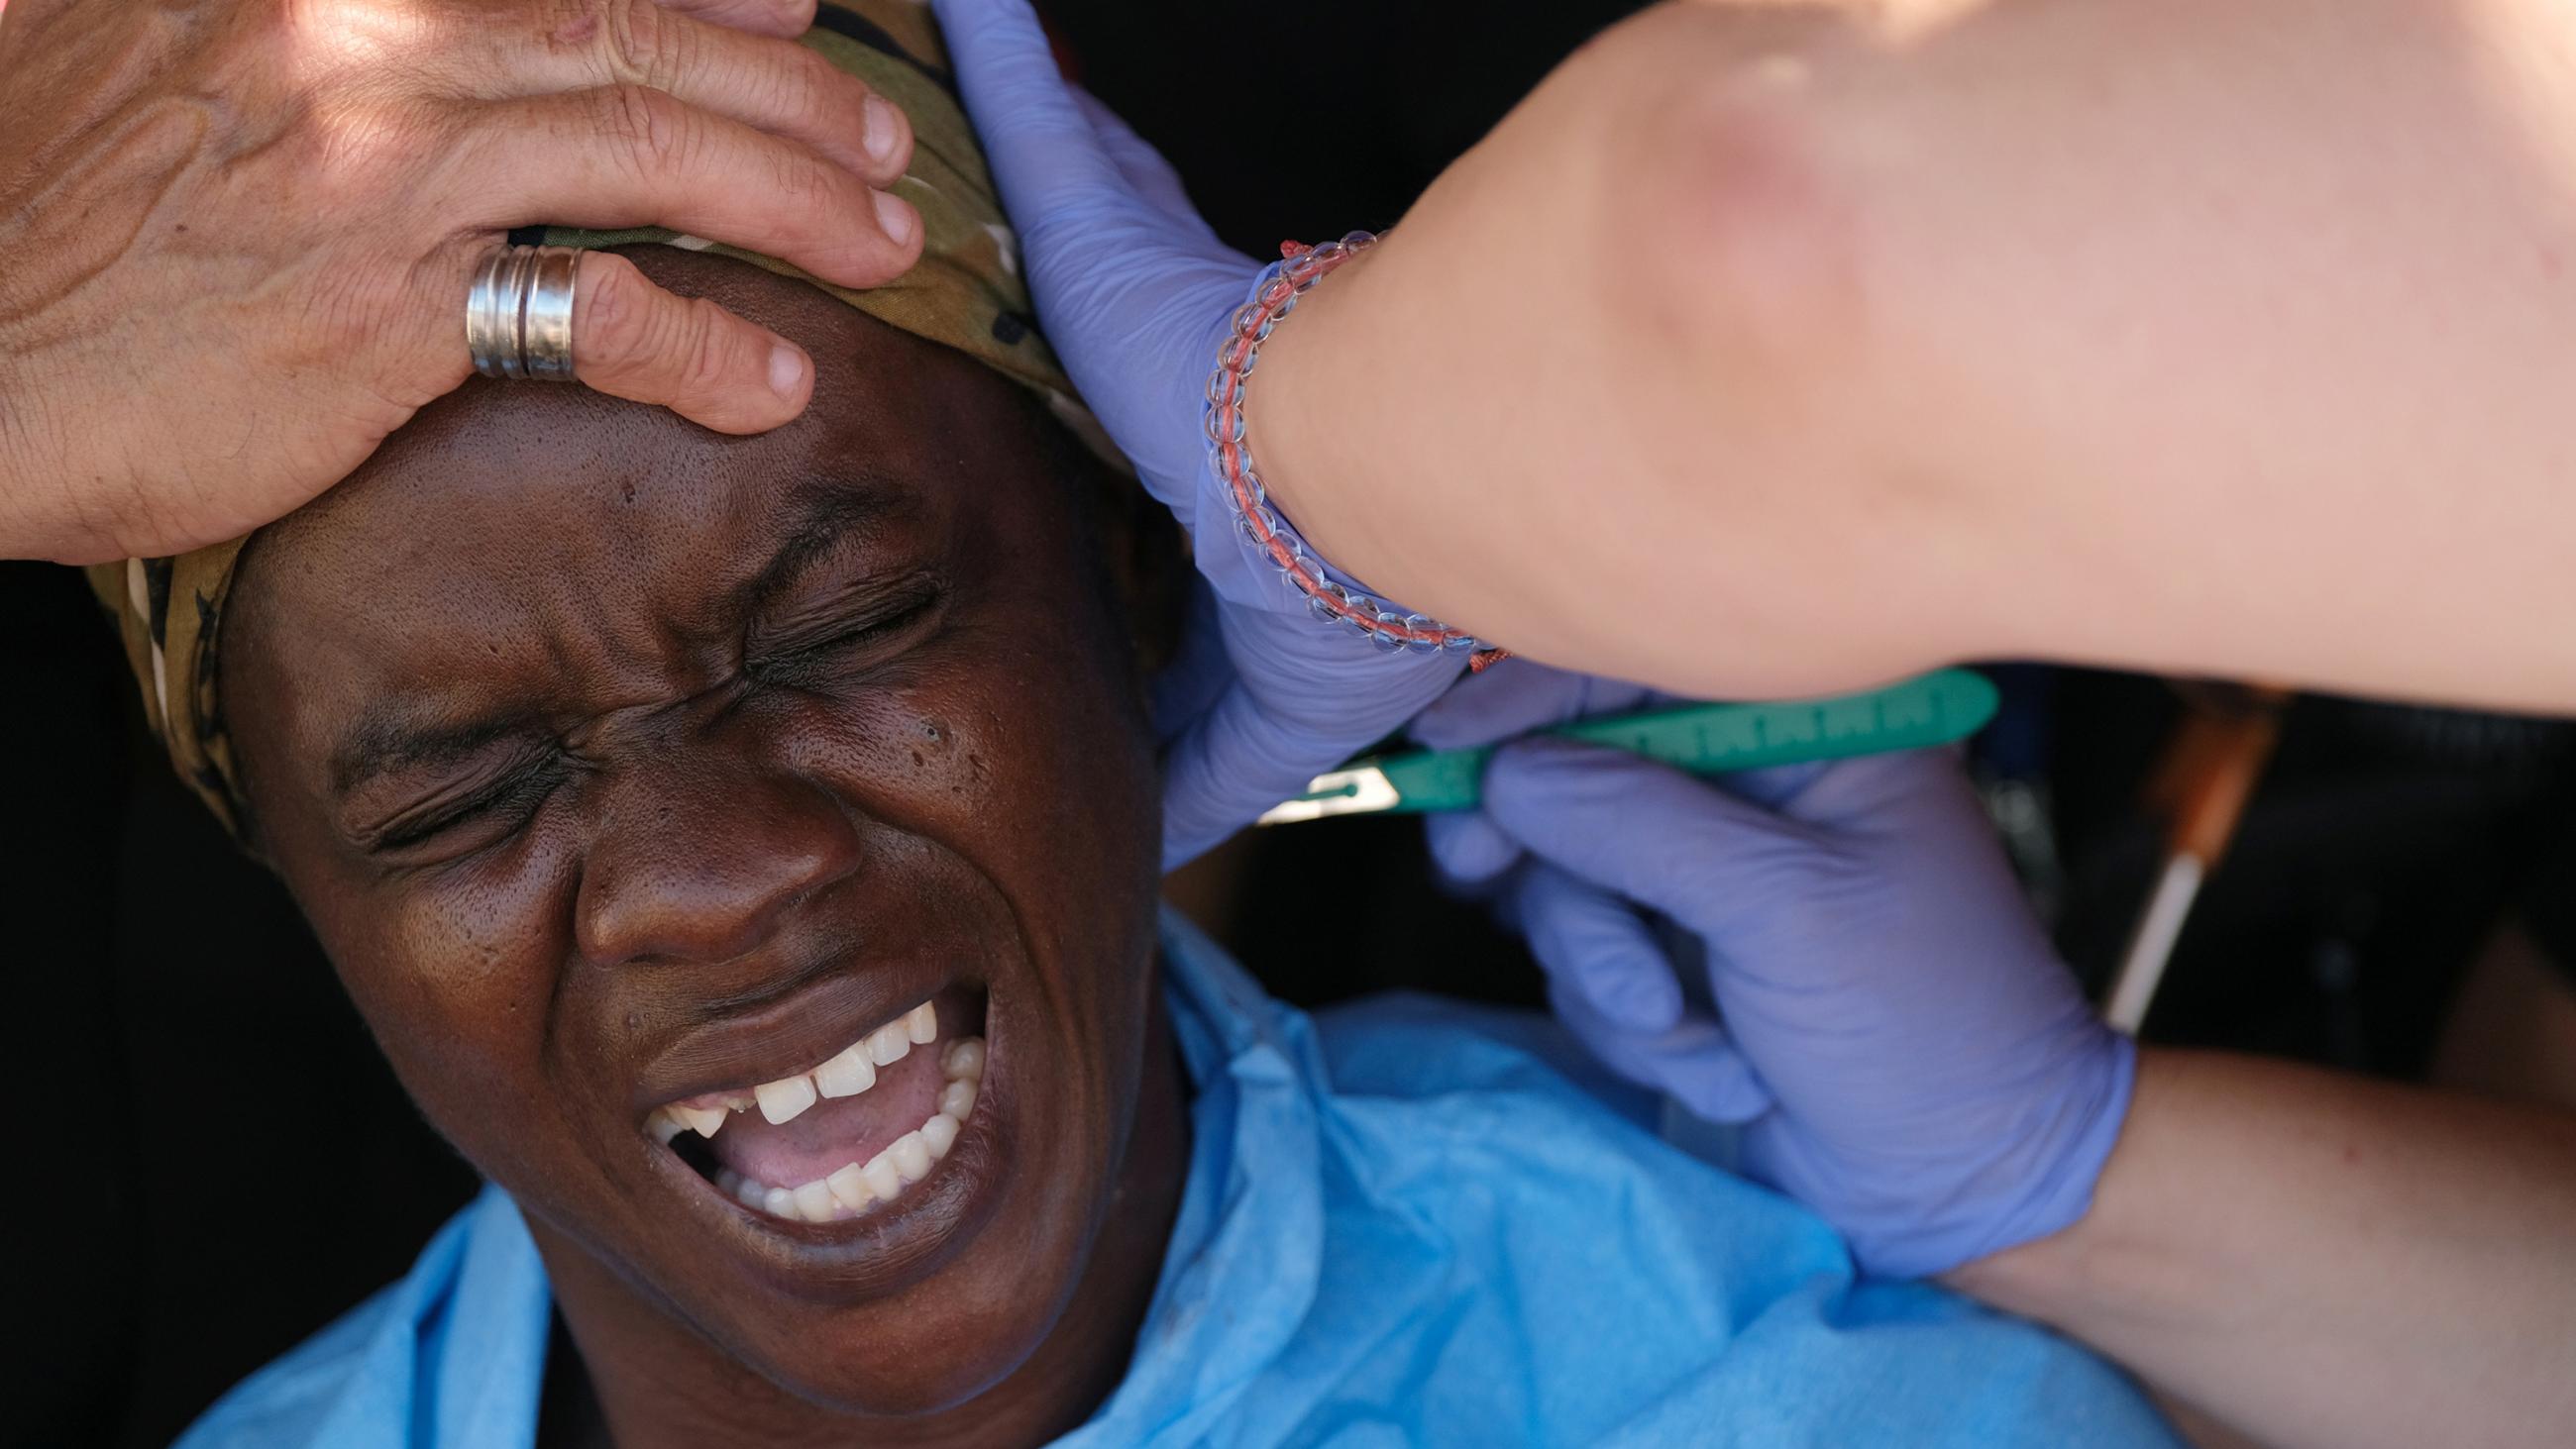 Picture shows a woman who is having a surgery done on her neck. She appears to be in excruciating pain. 